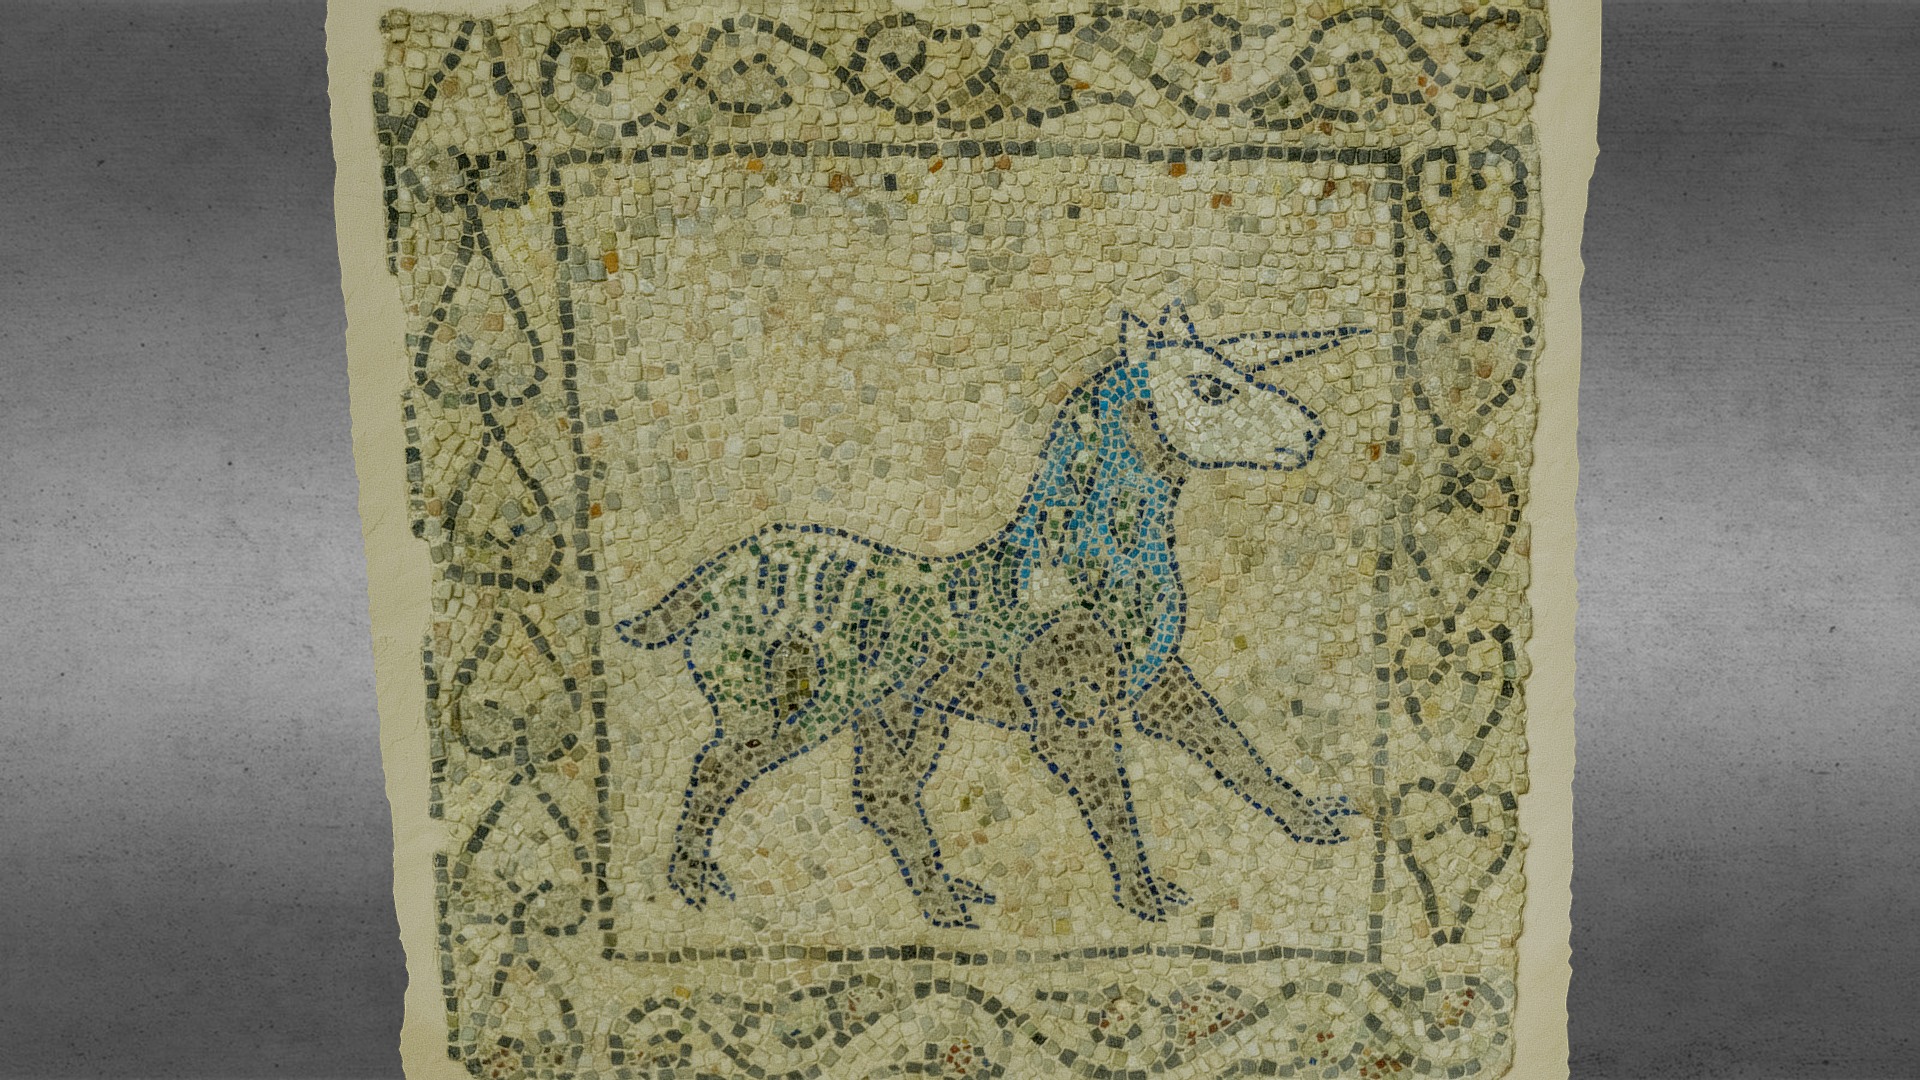 3D model Mosaico Unicorno Ver 2.0 - This is a 3D model of the Mosaico Unicorno Ver 2.0. The 3D model is about map.